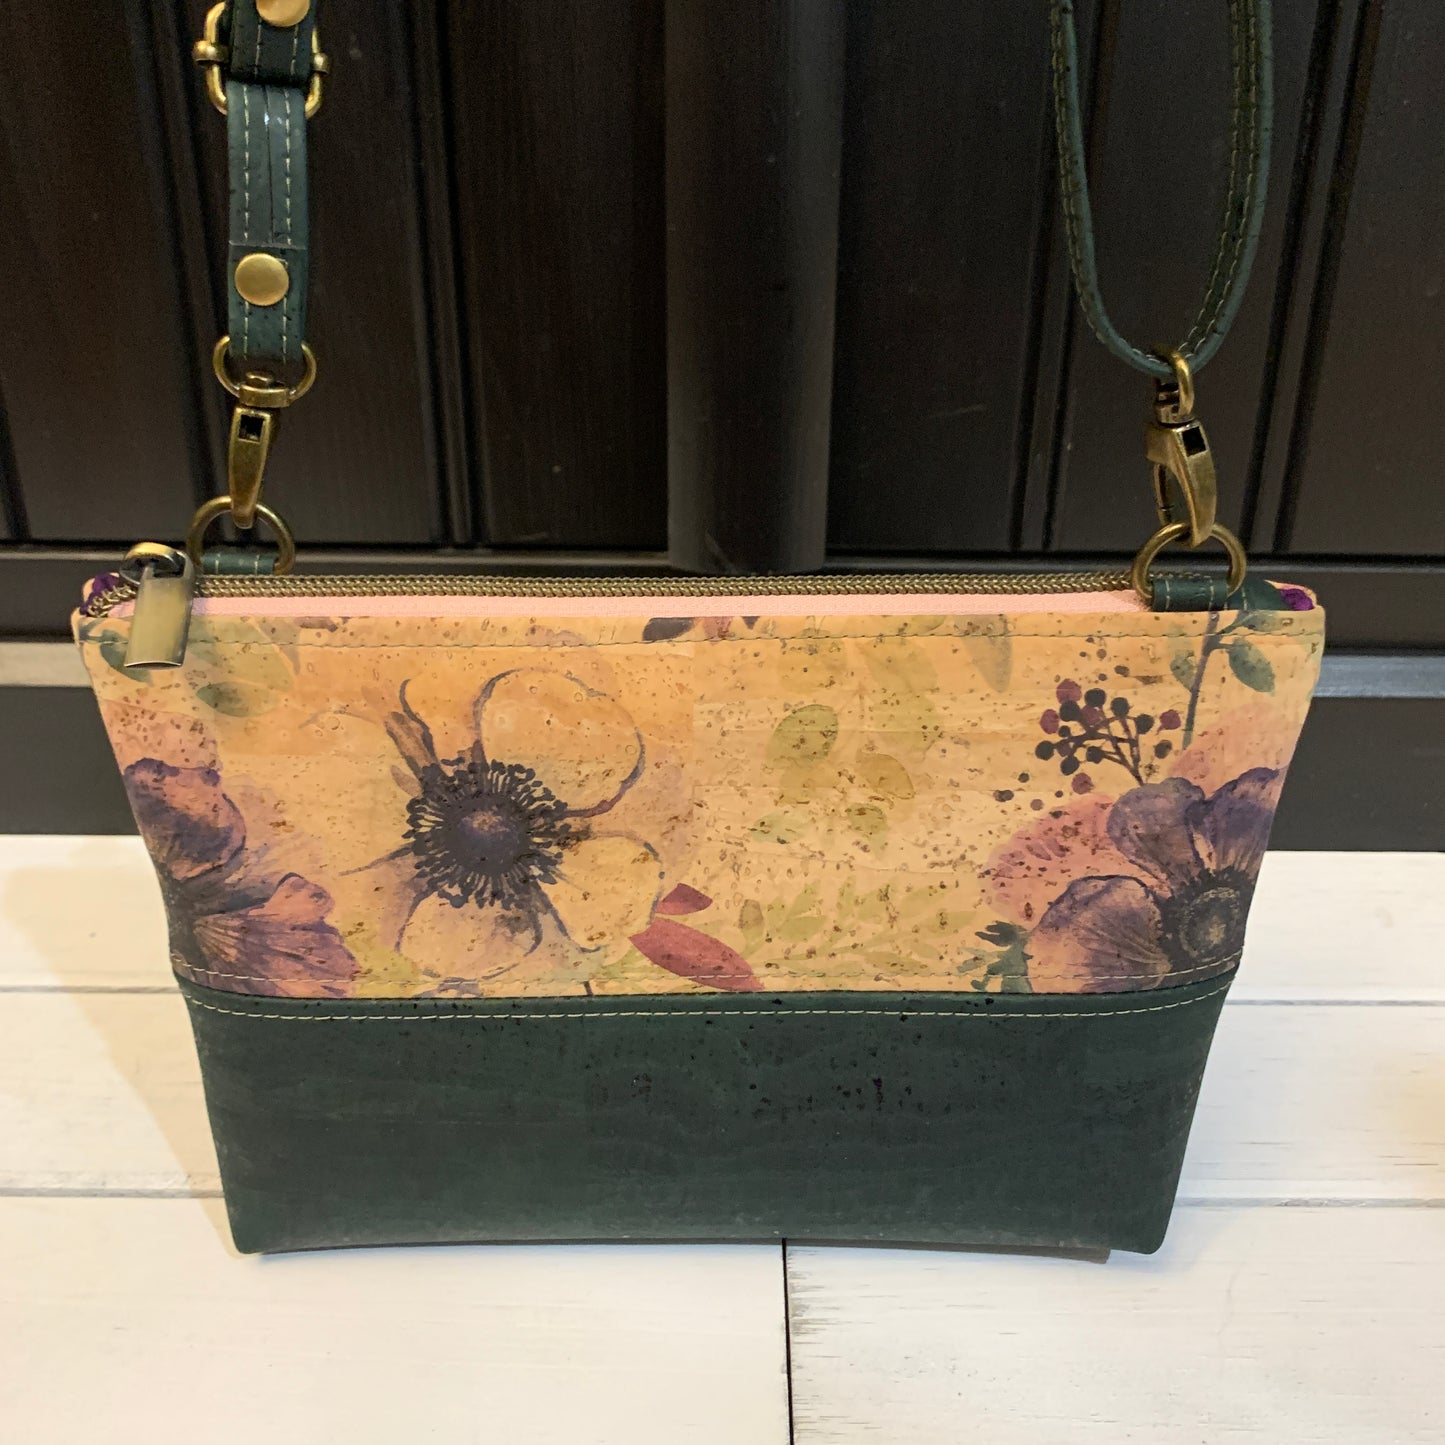 Paradigm Crossbody Bag - Printed Anemone and Forest Green Cork